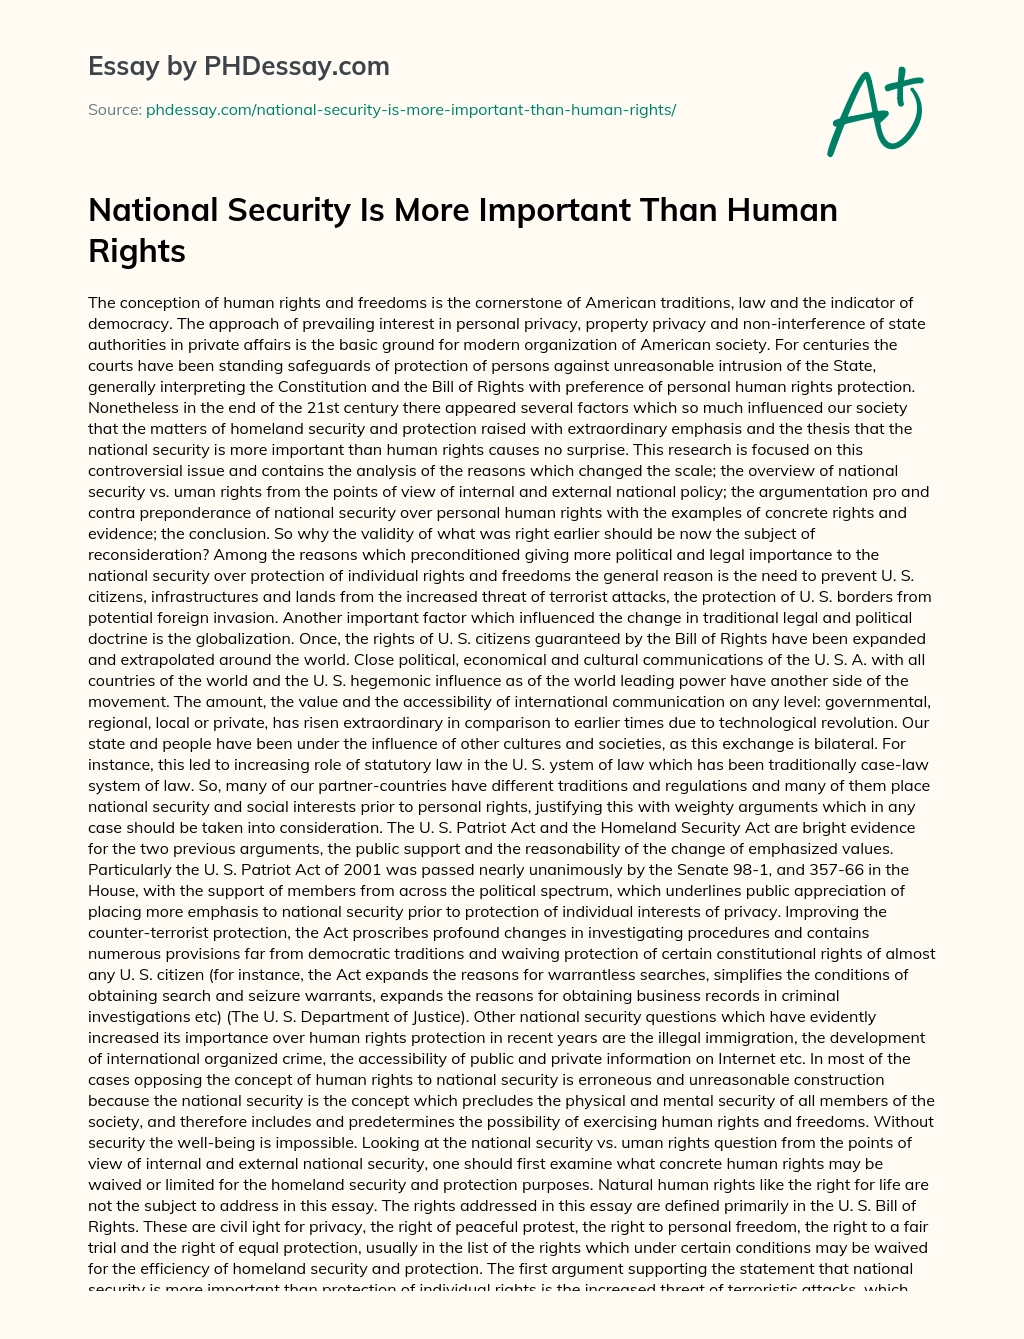 National Security Is More Important Than Human Rights essay